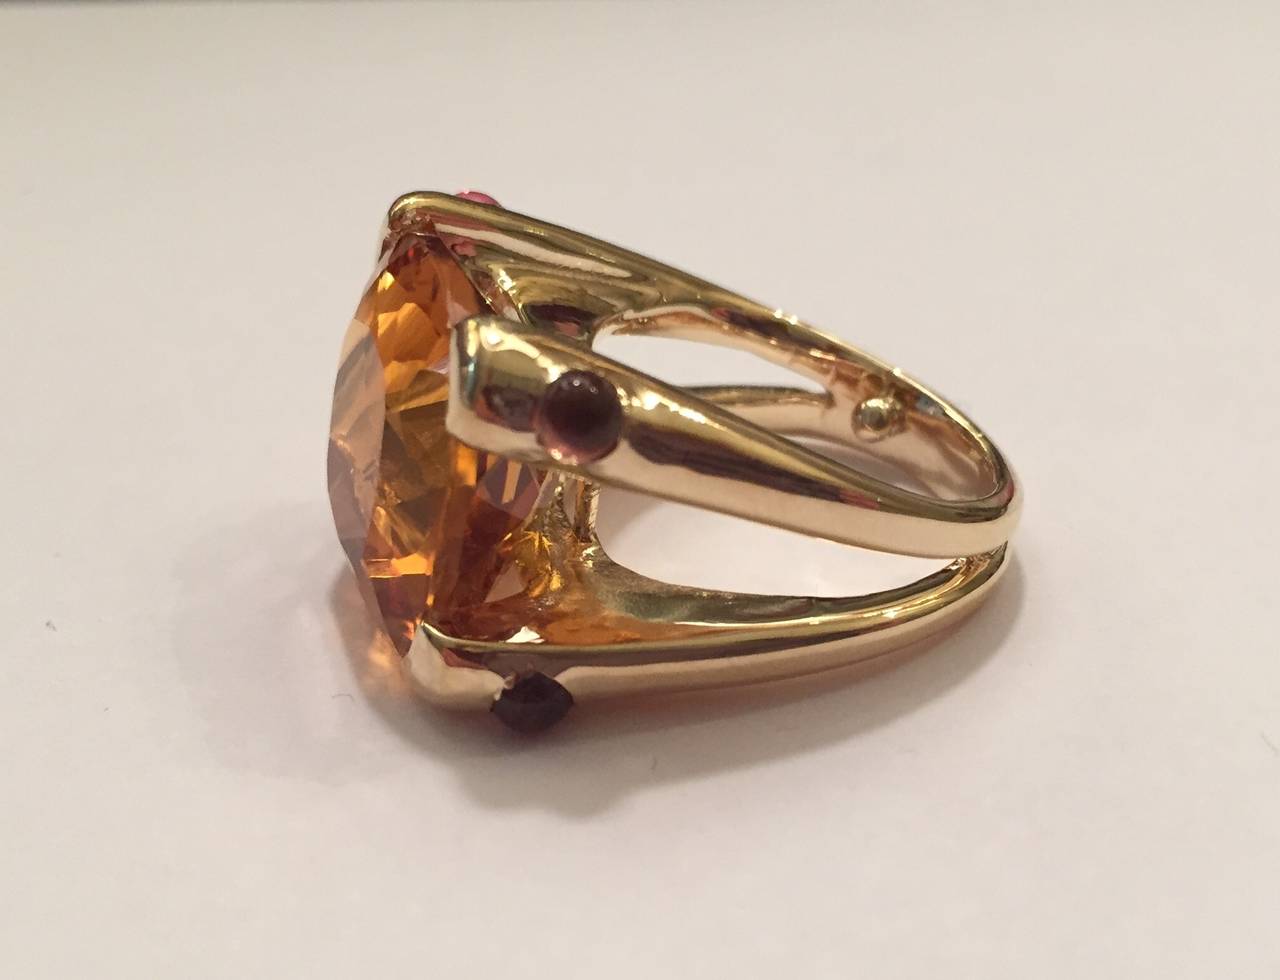 18kt Yellow Gold Cushion Ring with 15mm Orange Citrine (approximately 25 cts) and four Cabochon Pink Topaz (approximately 0.40 cts)..
Center faceted Citrine has an orange tone offset by the soft pink cabochon pink topaz accent stone.  The elegant